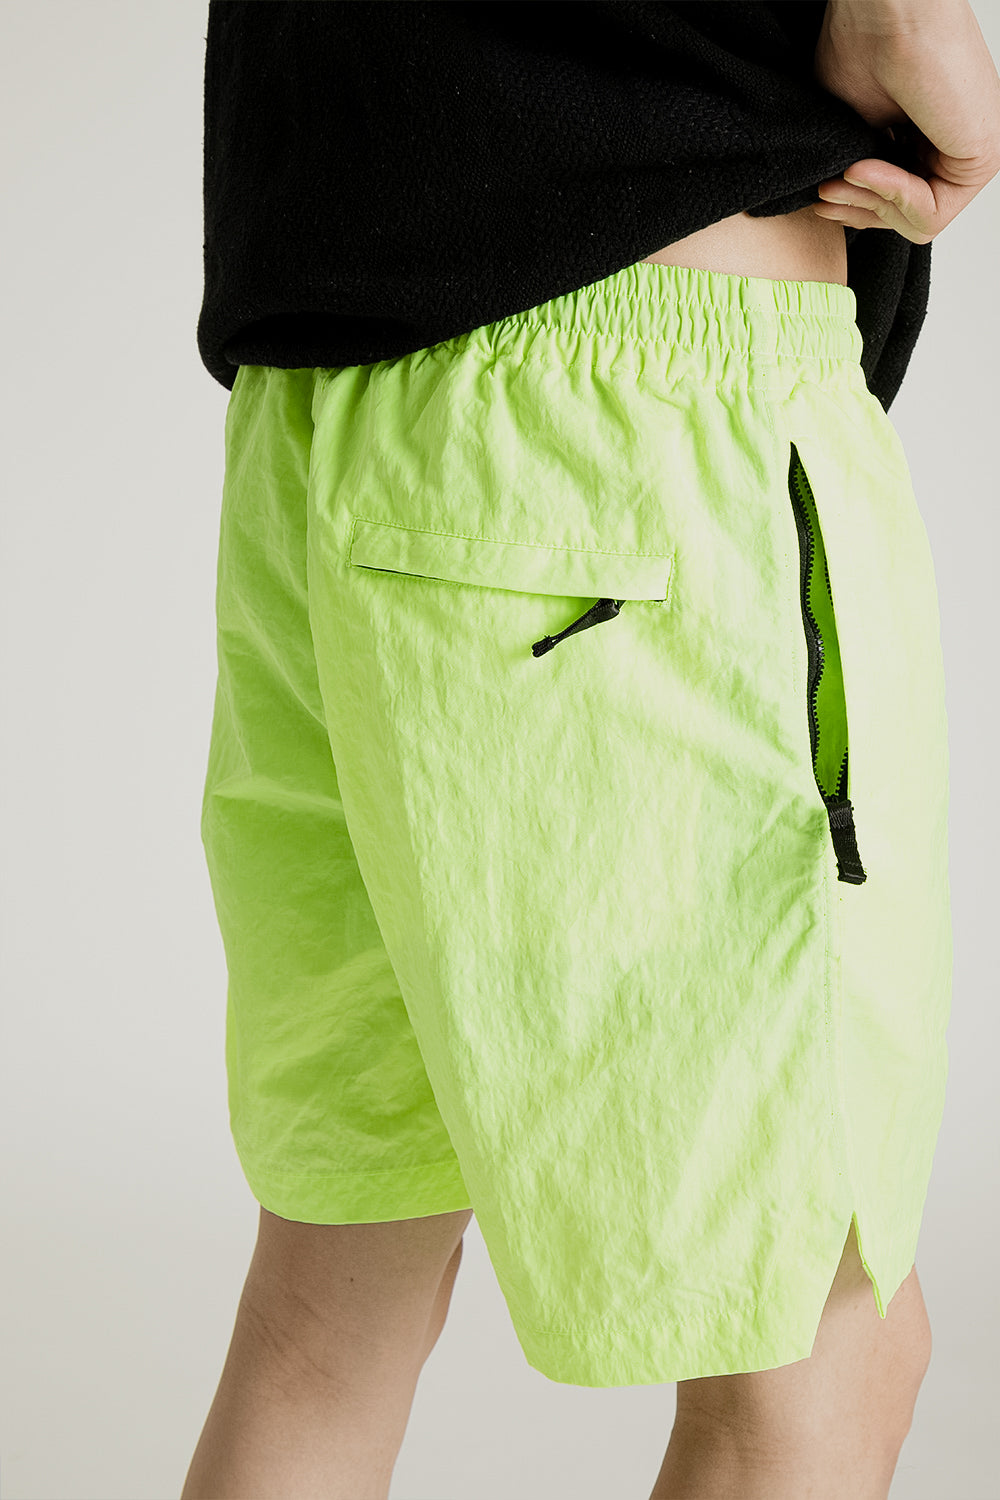 Sunflower Mike Shorts in Neon Yellow